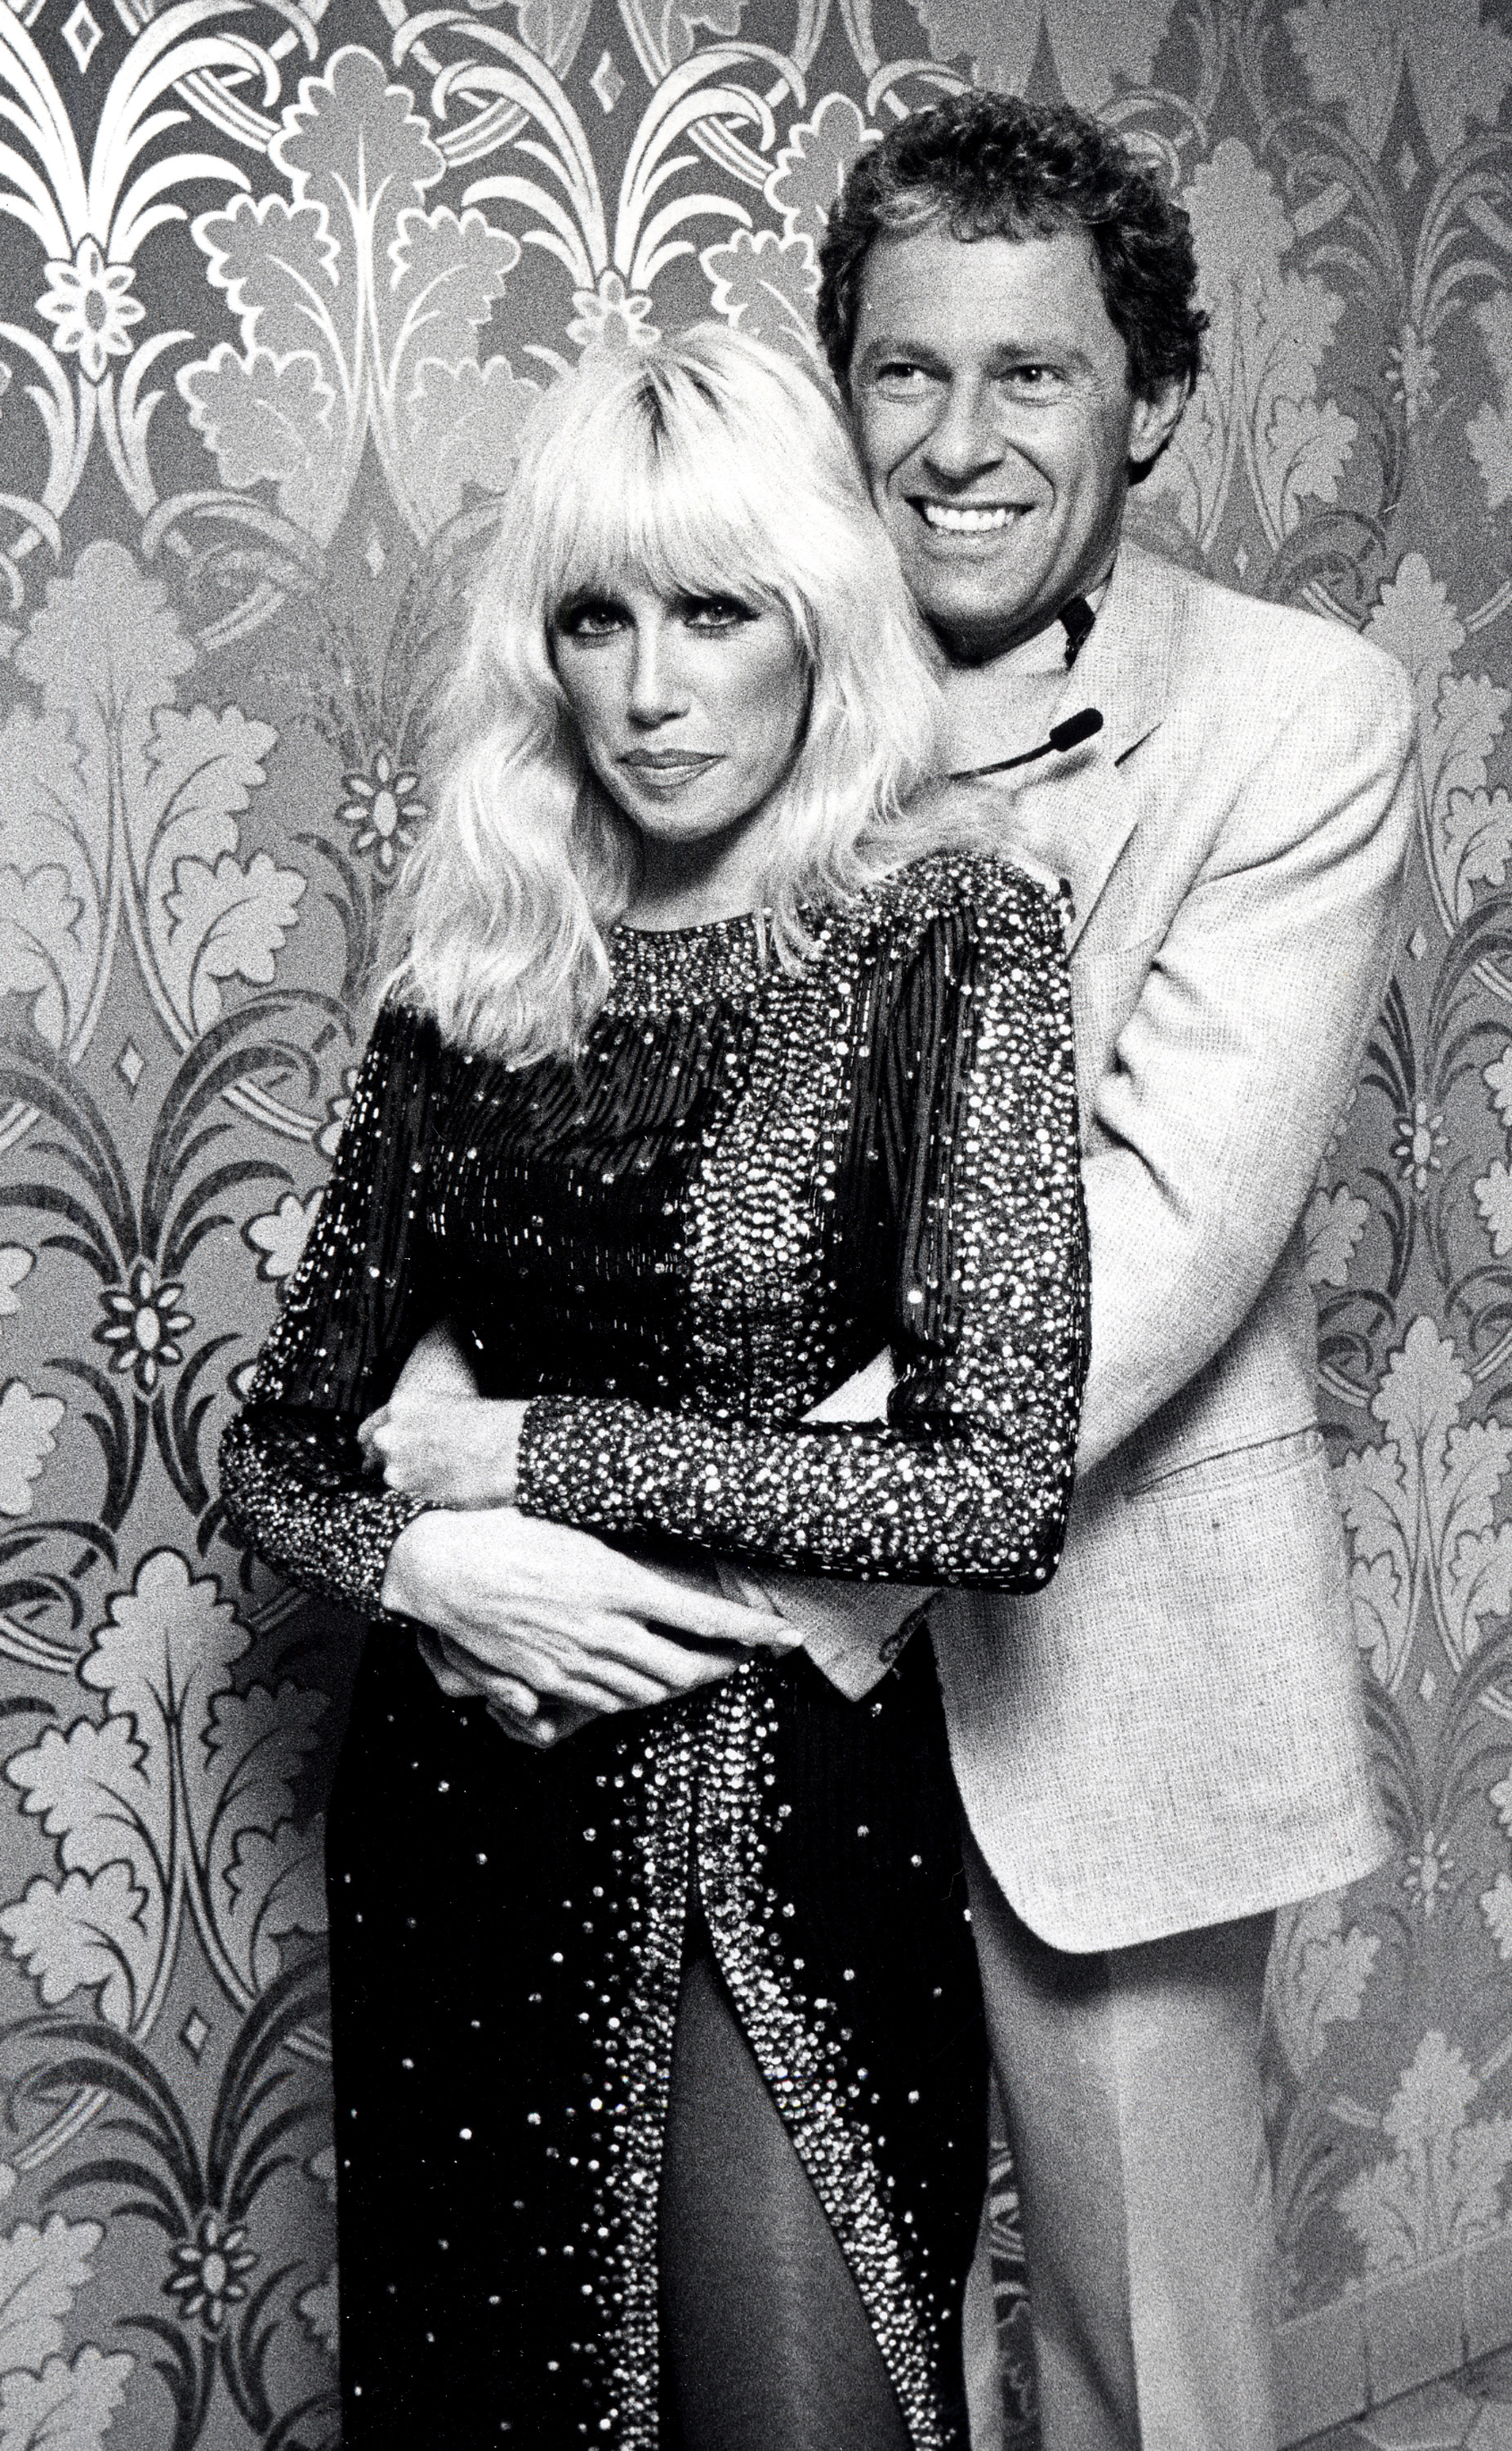 Suzanne Somers and Alan Hamel at the "Dinner with Tiffany's" Lennox Hill Hospital Benefit in New York City on November 15, 1982 | Source: Getty Images